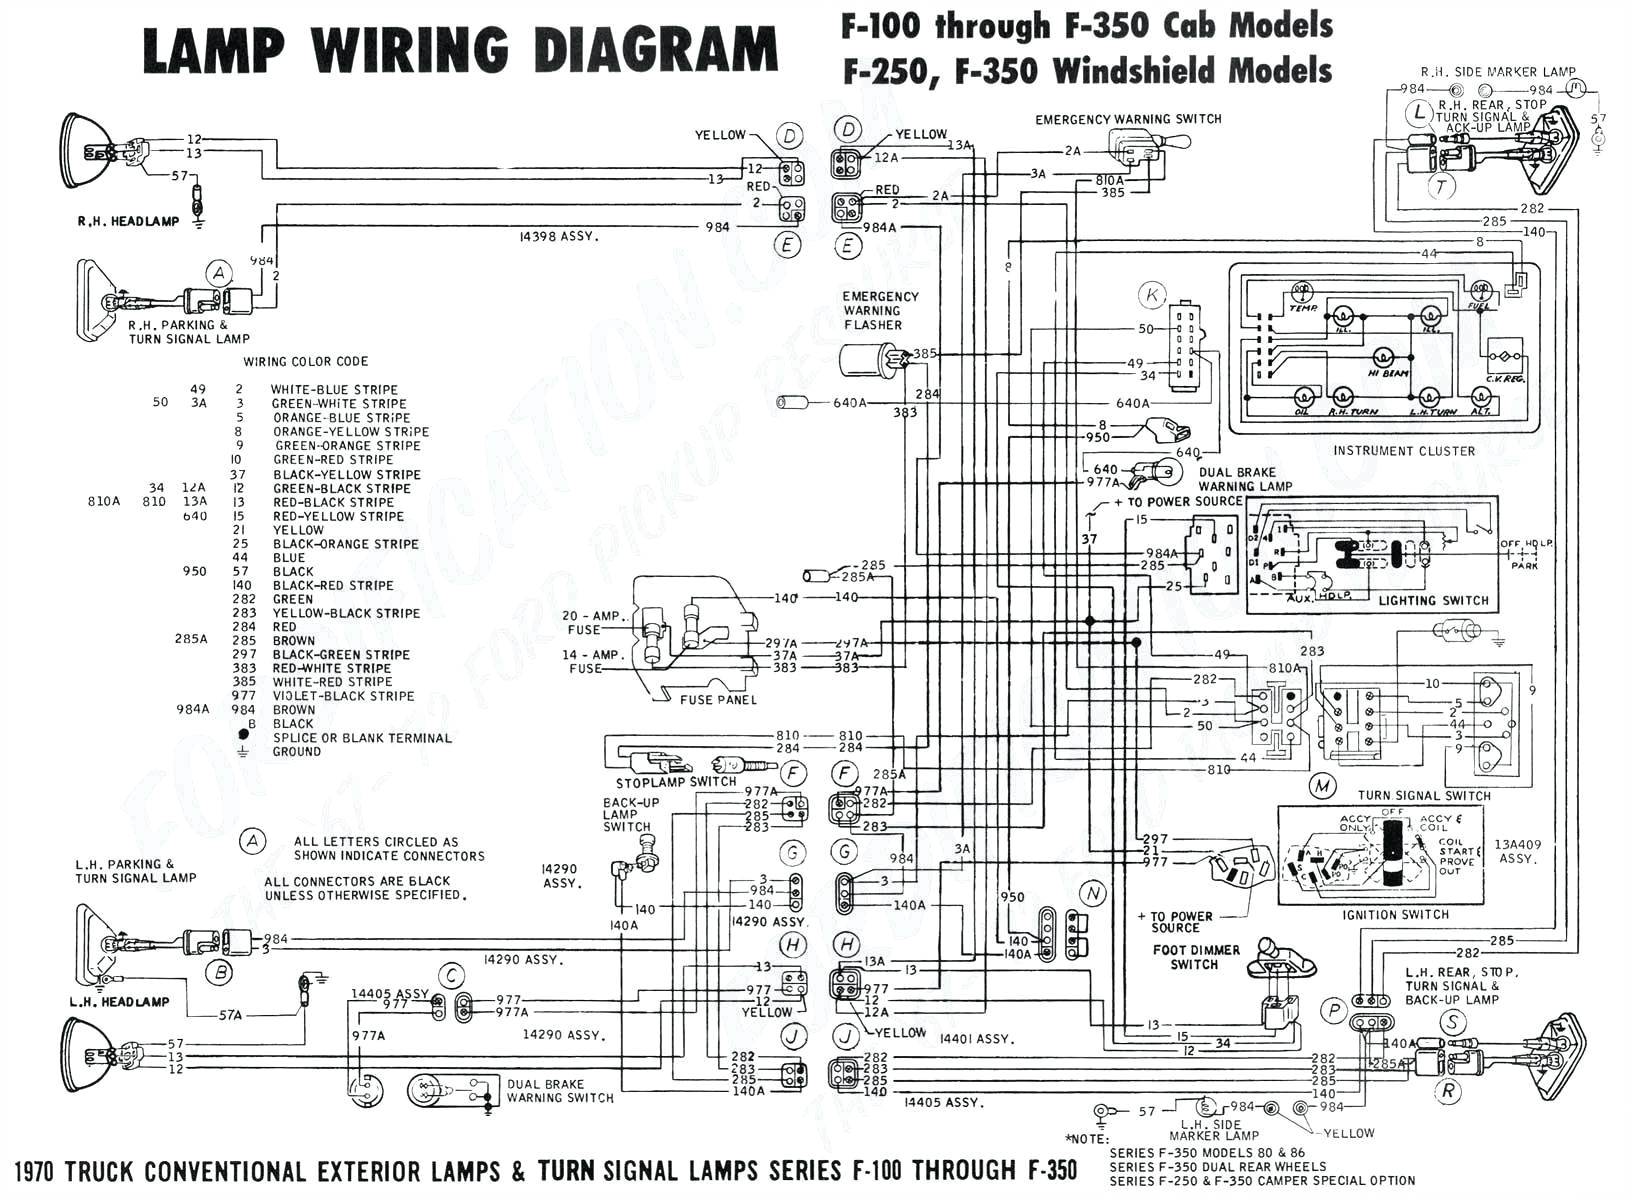 turn signal diagram as well jeep wrangler tj wiring harness diagram jeep cherokee tail light wiring diagram jeep tail light wiring diagram